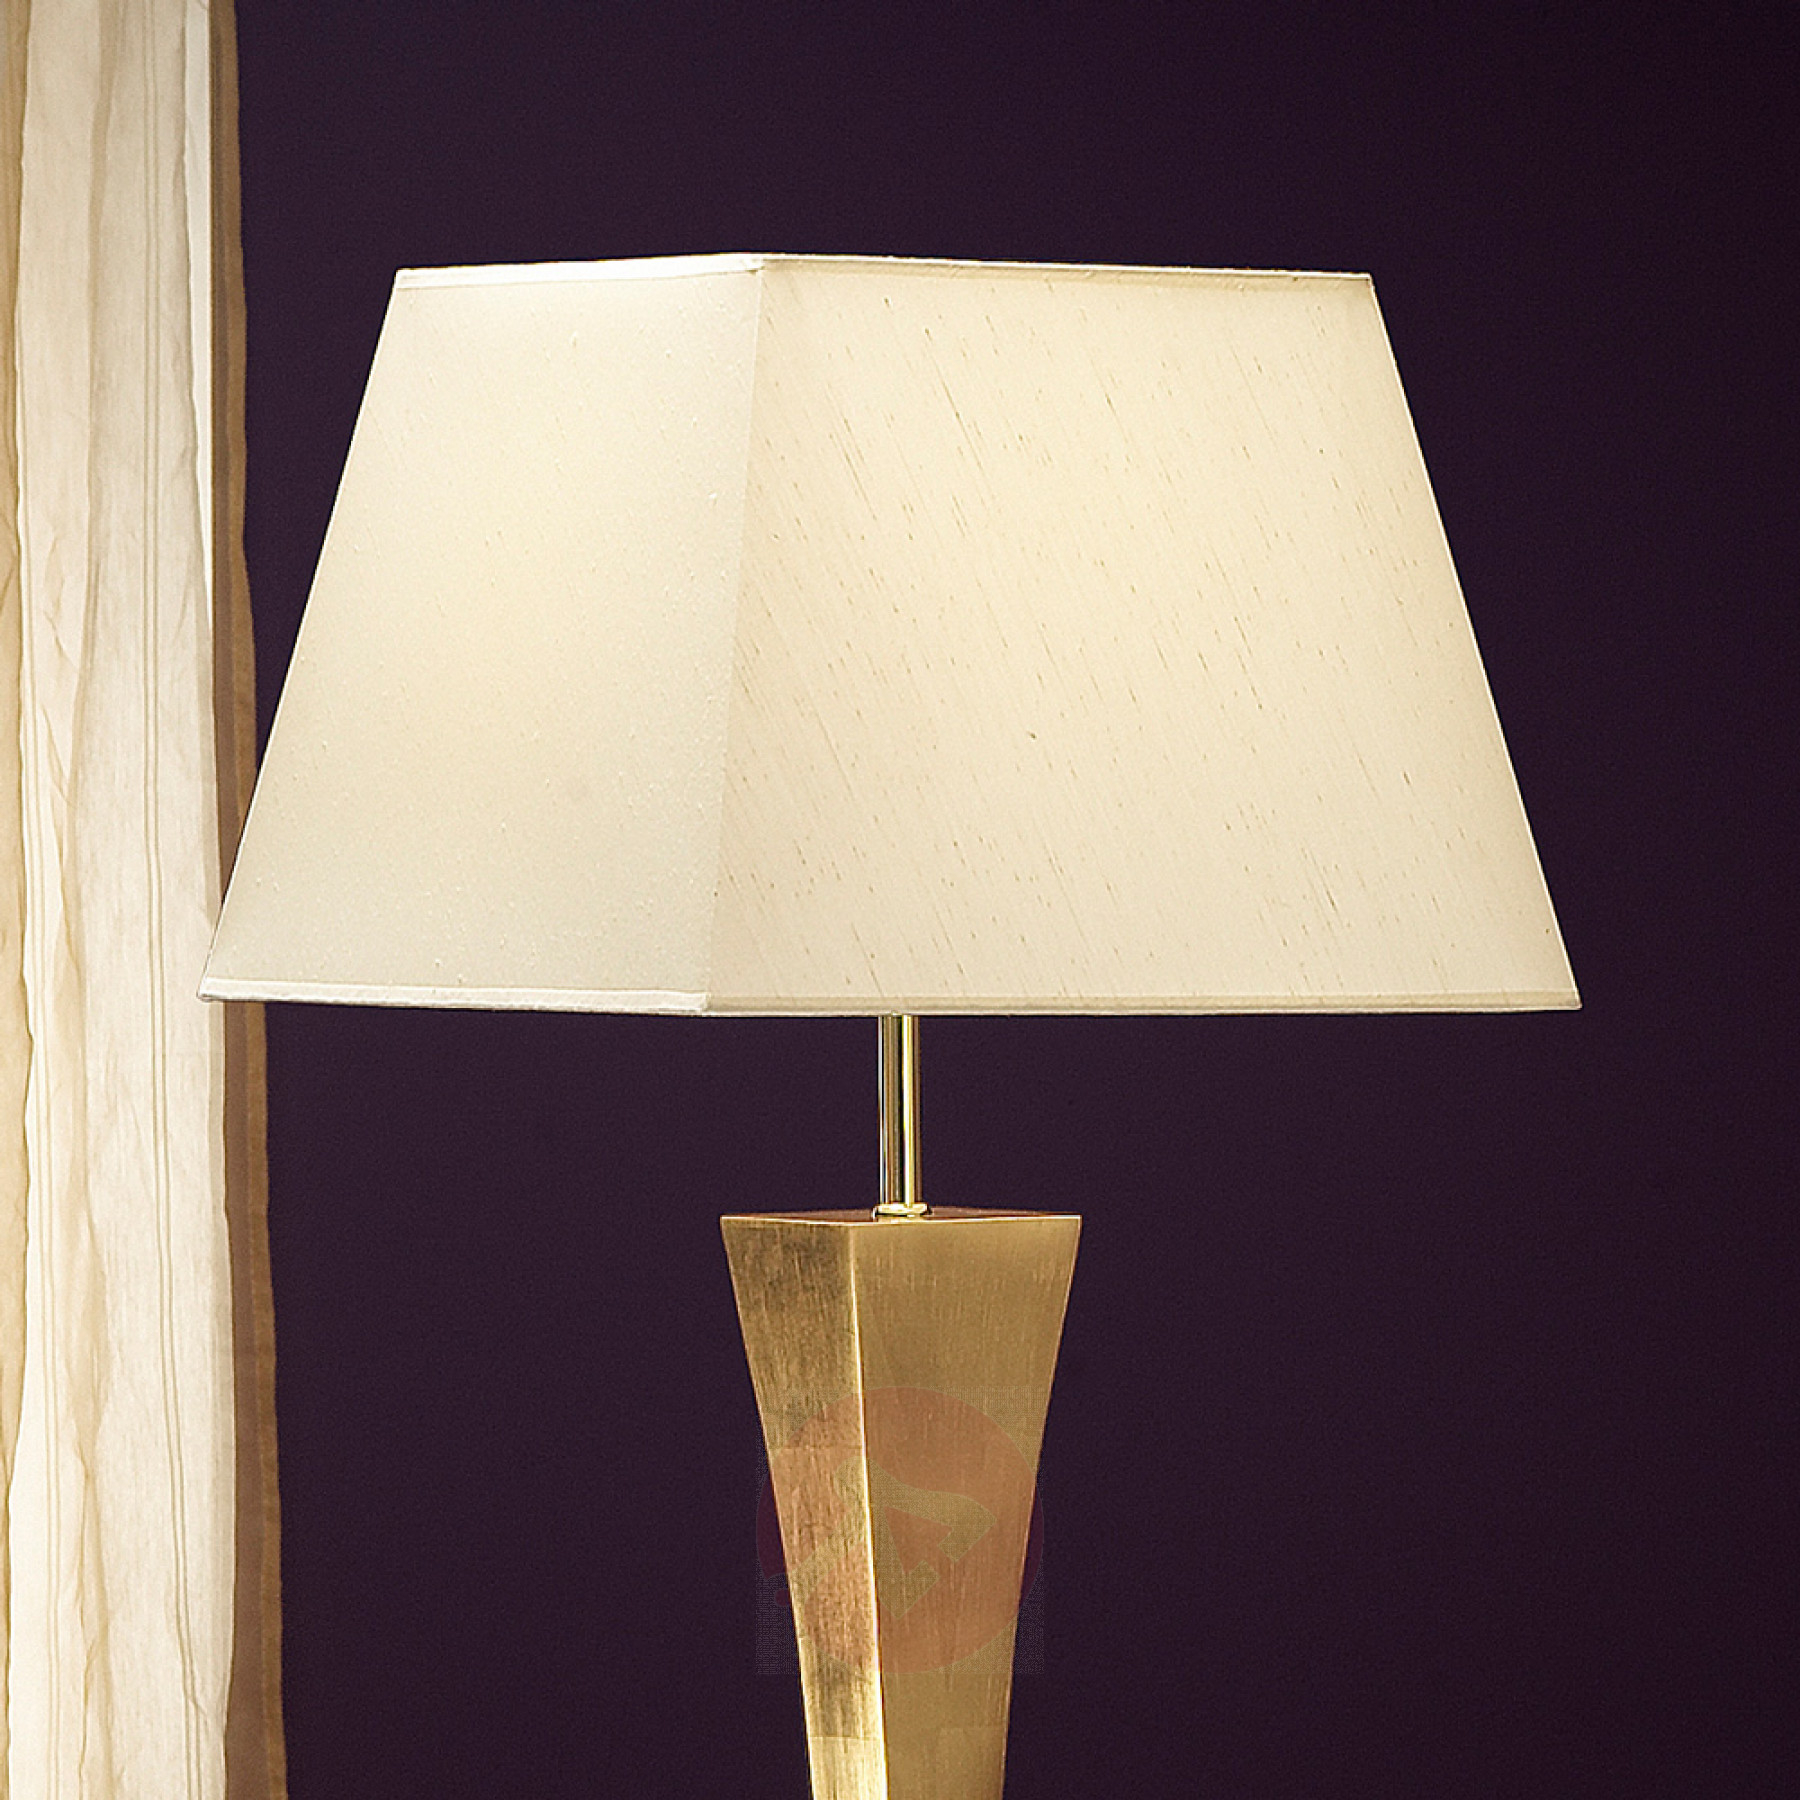 Deco A Floor Lamp With An Elegant Design intended for size 1800 X 1800